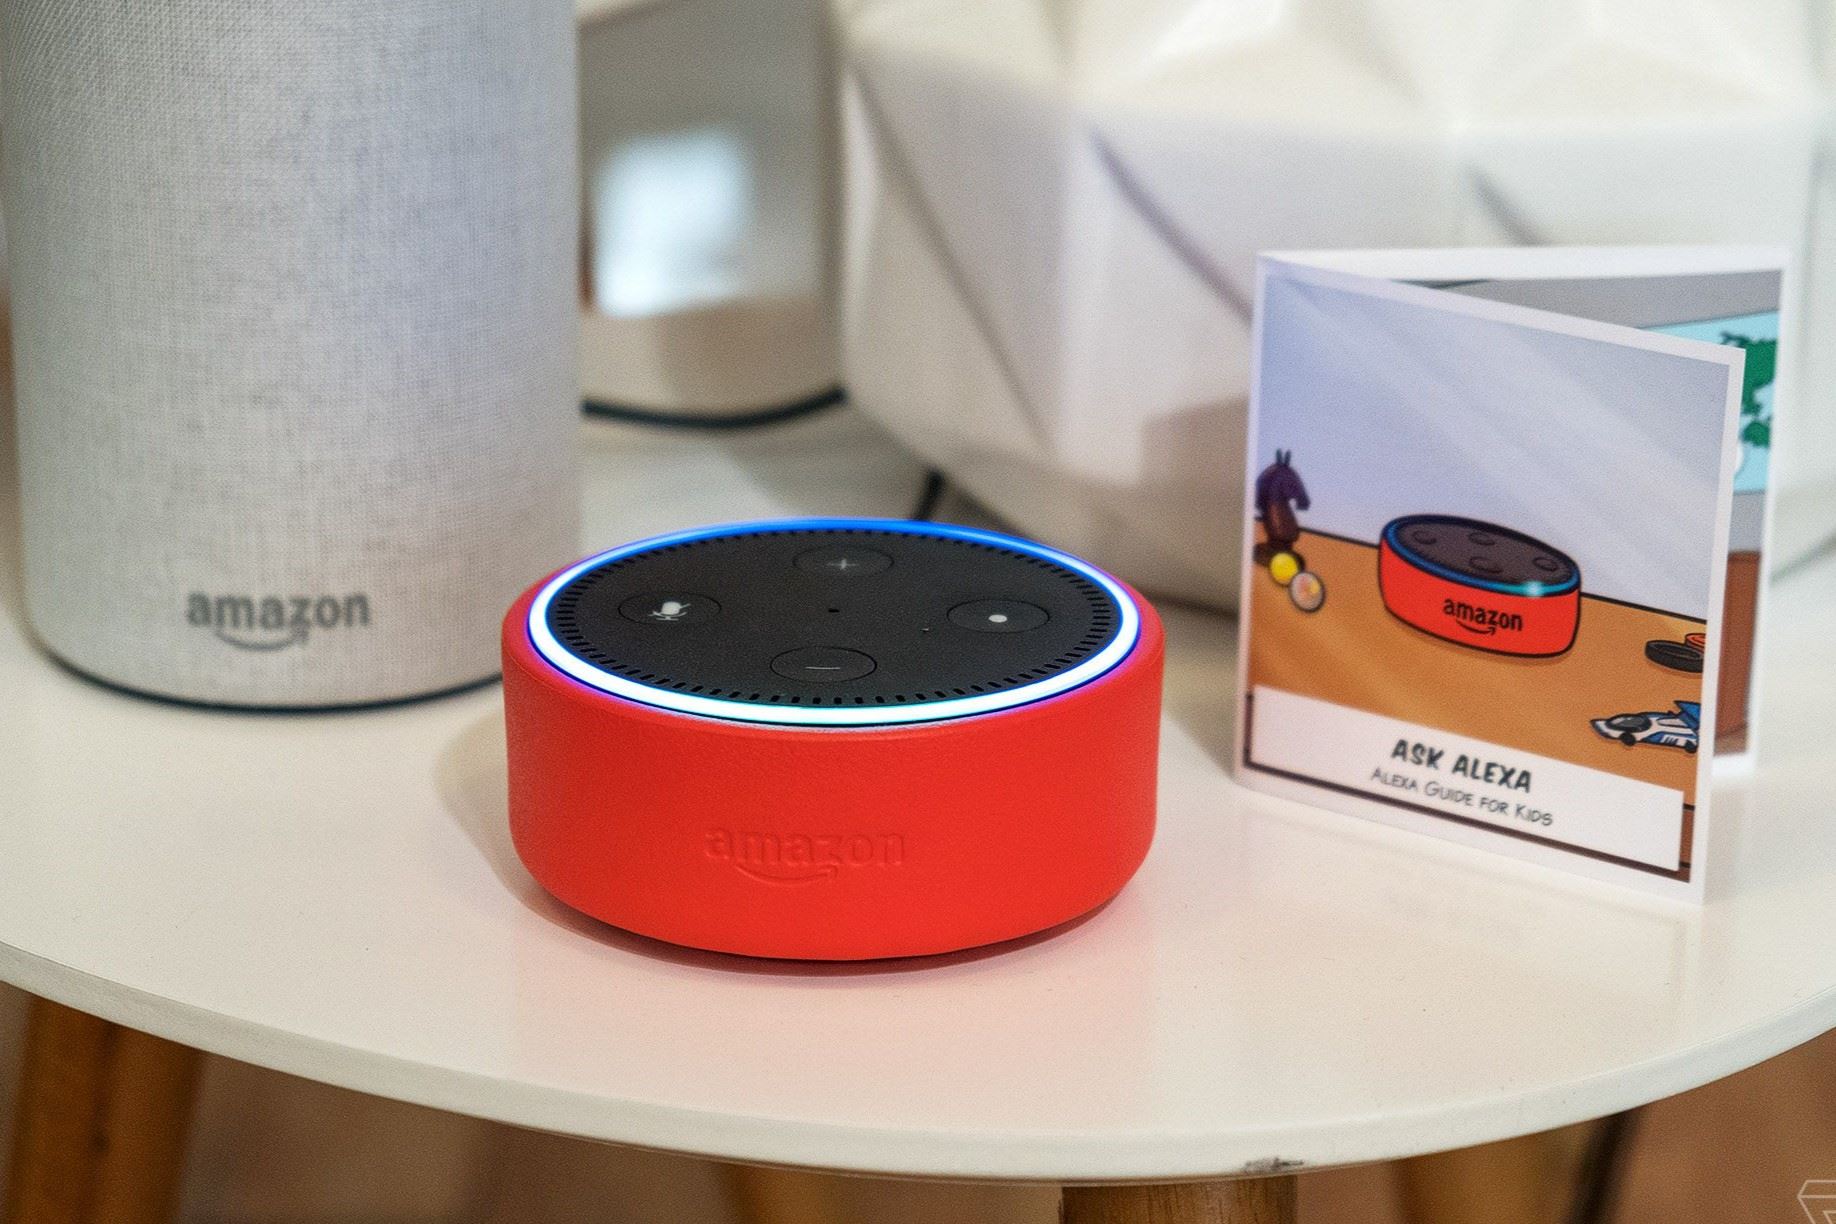 What Do You Need For The Amazon Echo To Work